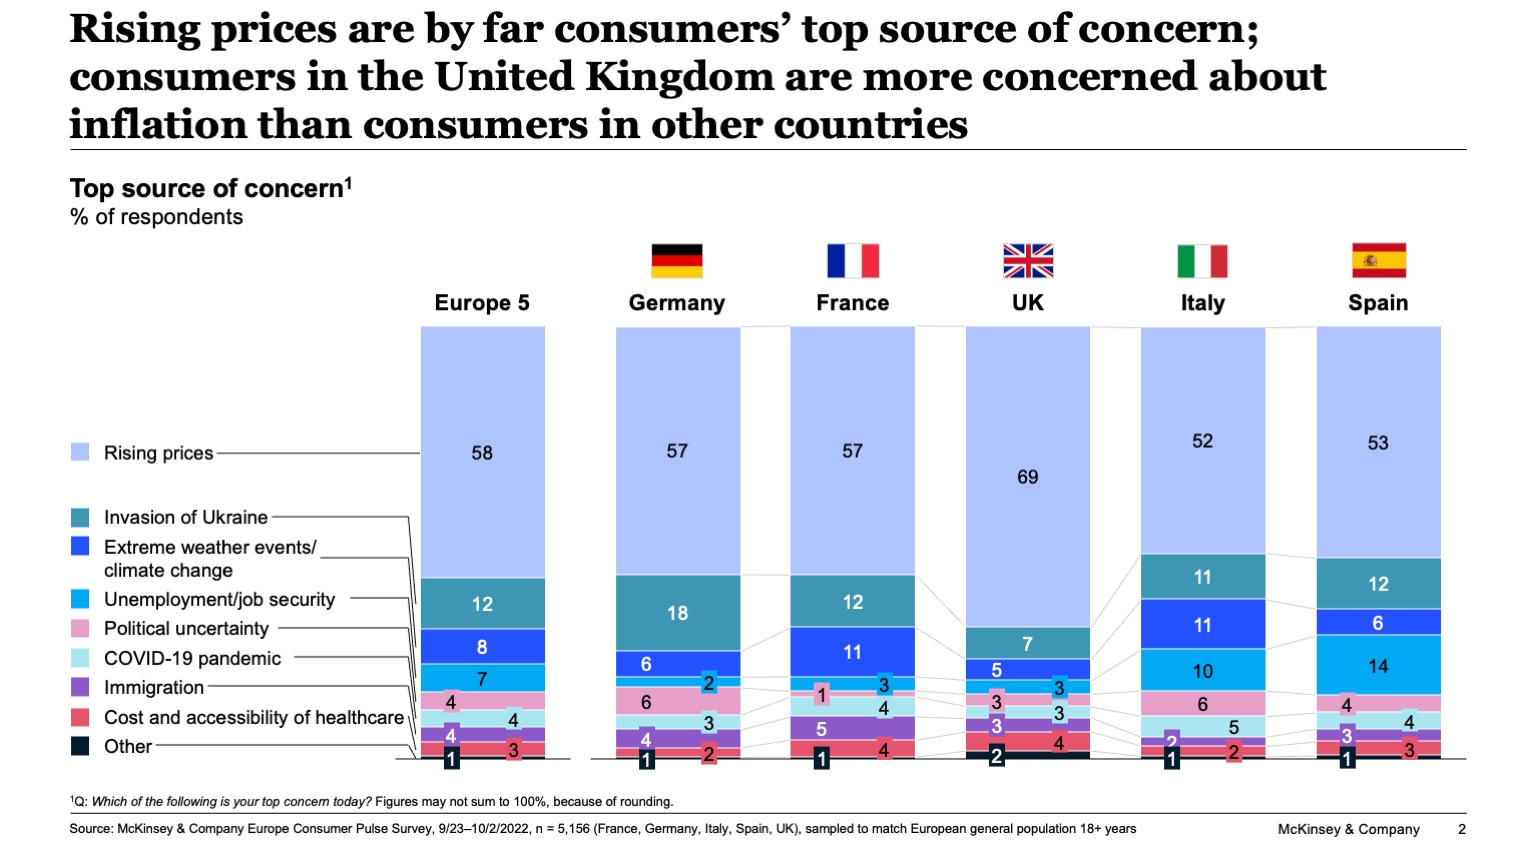 Rising prices are by far consumers’ top source of concern; consumers in the United Kingdom are more concerned about inflation than consumers in other countries